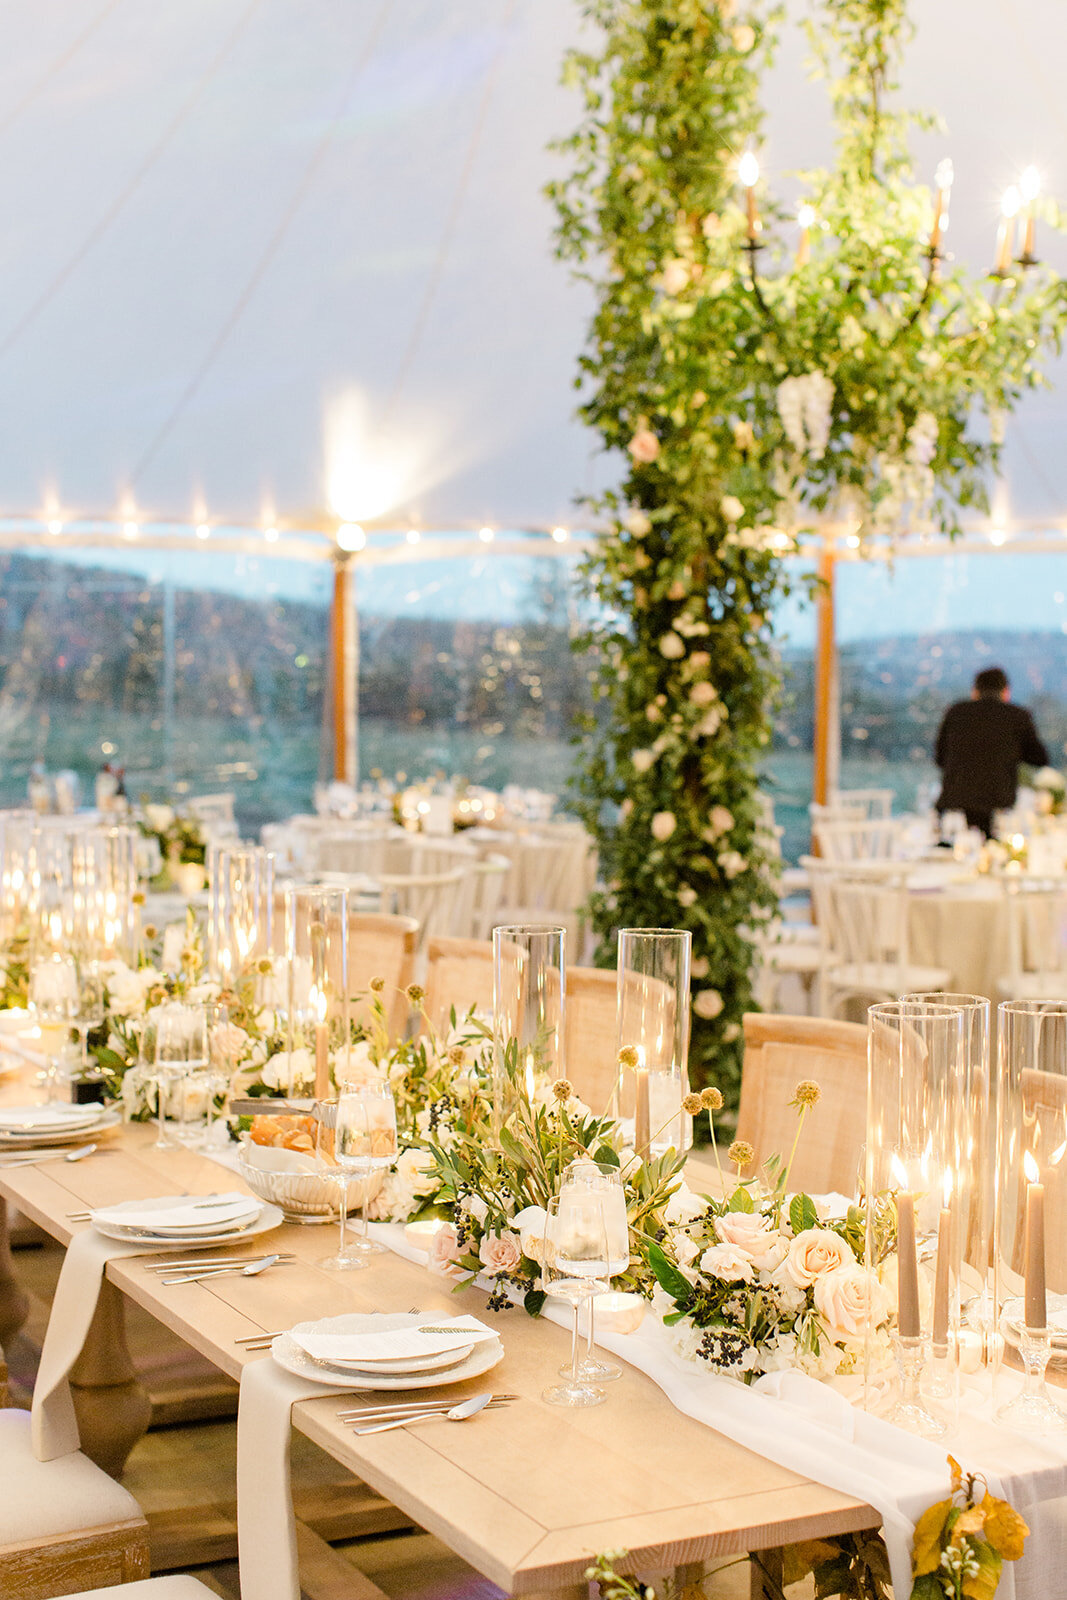 elegant wedding reception with floral centerpieces, glassed candles and dinnerwares